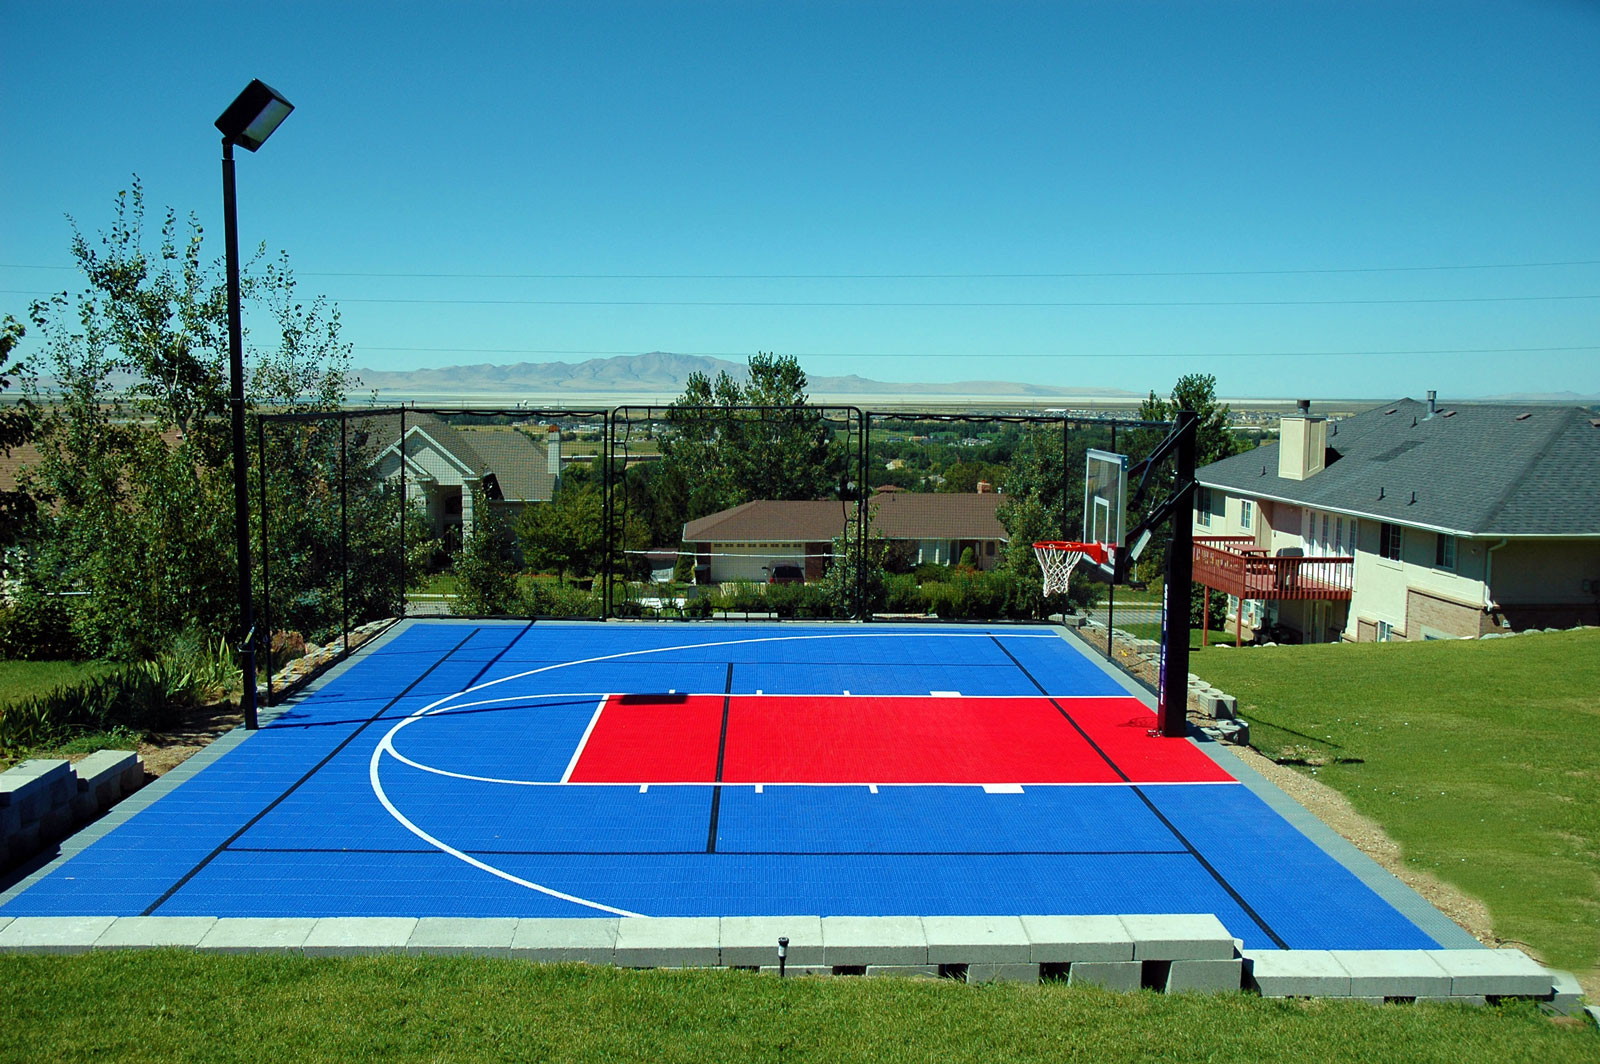 Multi-court in bright blue and red with lights and fencing